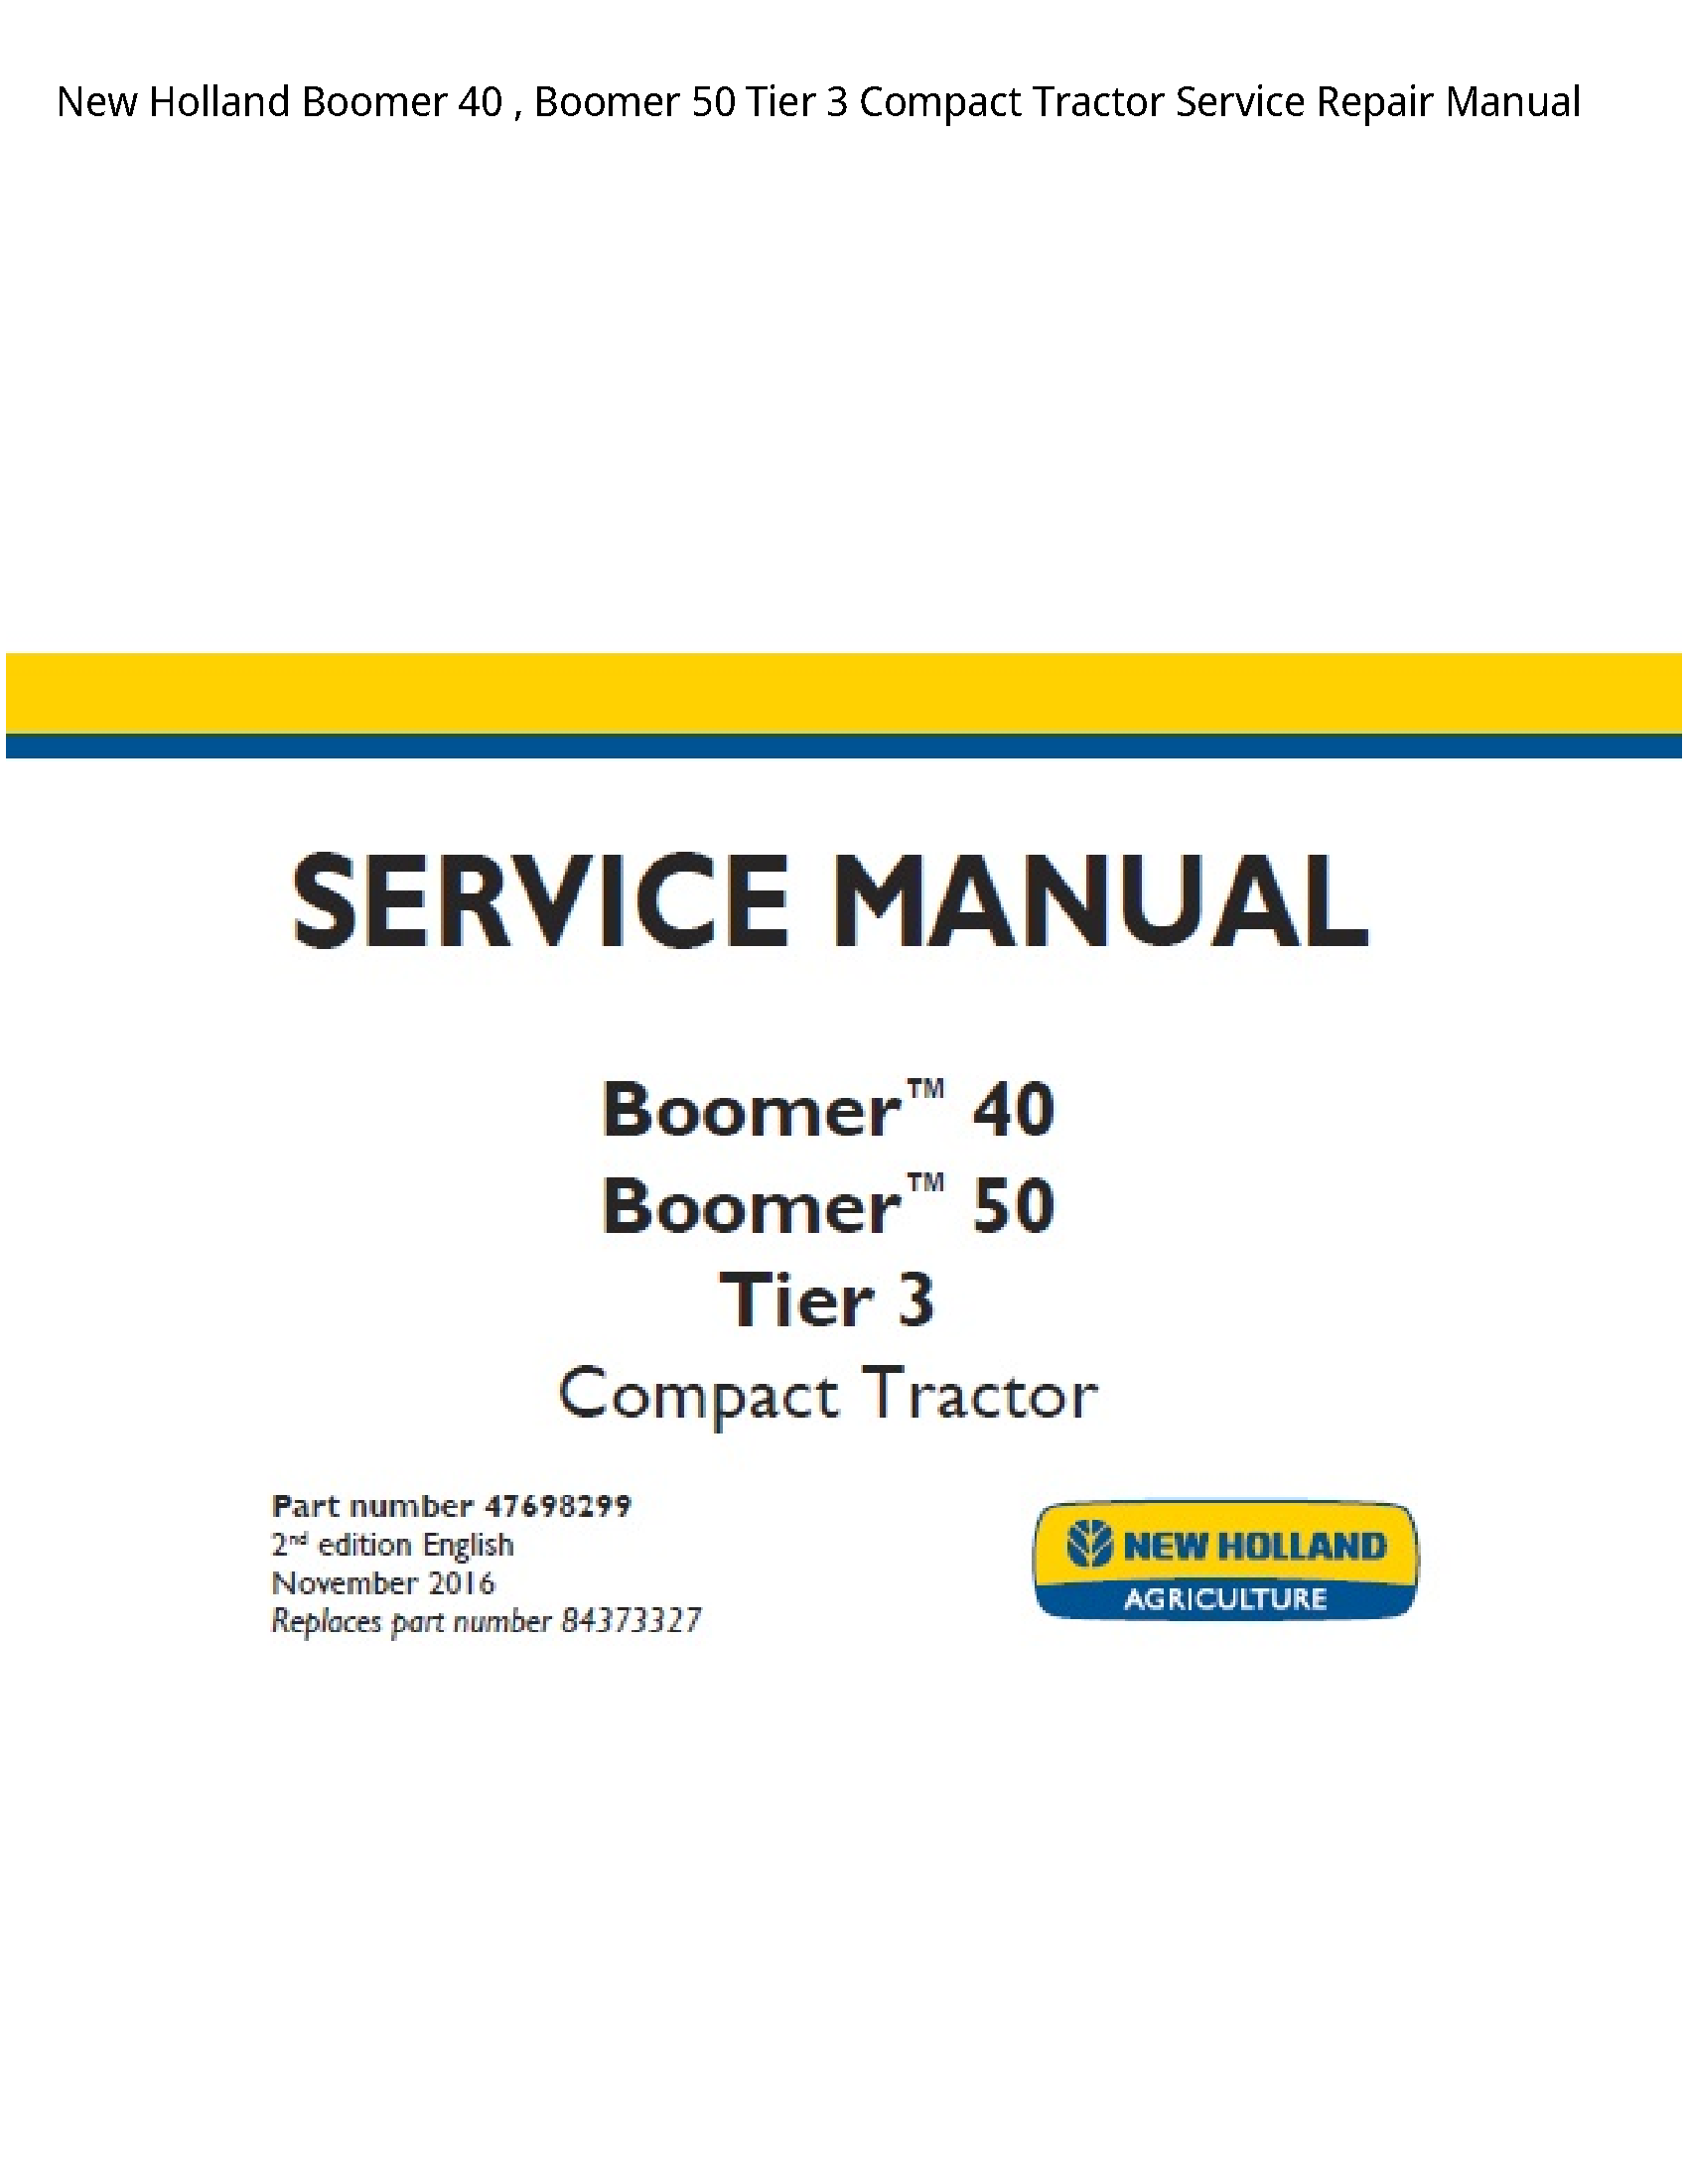 New Holland 40 Boomer Boomer Tier Compact Tractor manual